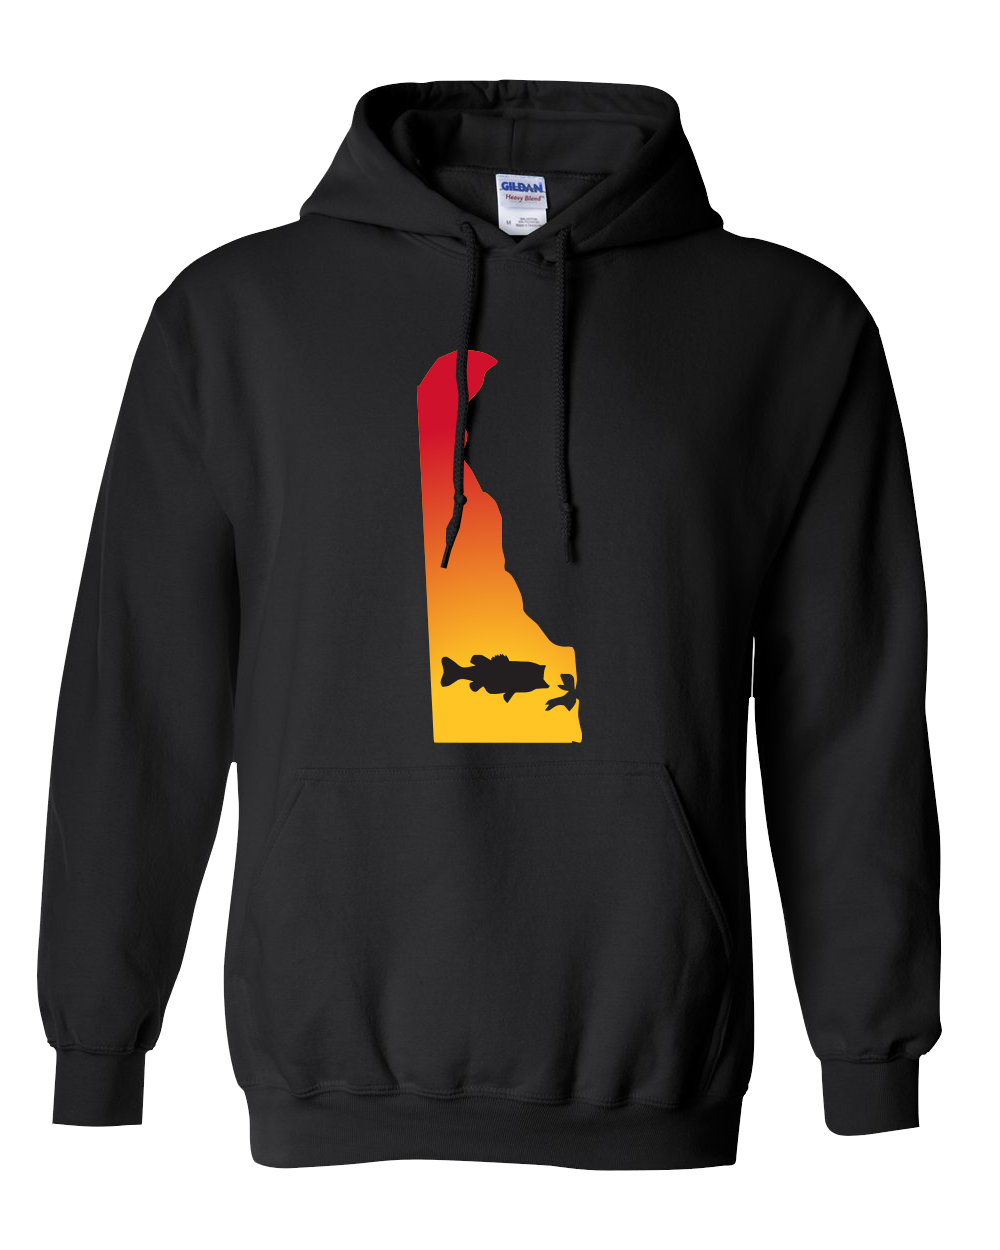 Pullover Hooded Sweatshirt Delaware Black Large Mouth Bass Vibrant Design High Quality Tight Knit Ring Spun Low Maintenance Cotton Printed With The Newest Available Color Transfer Technology